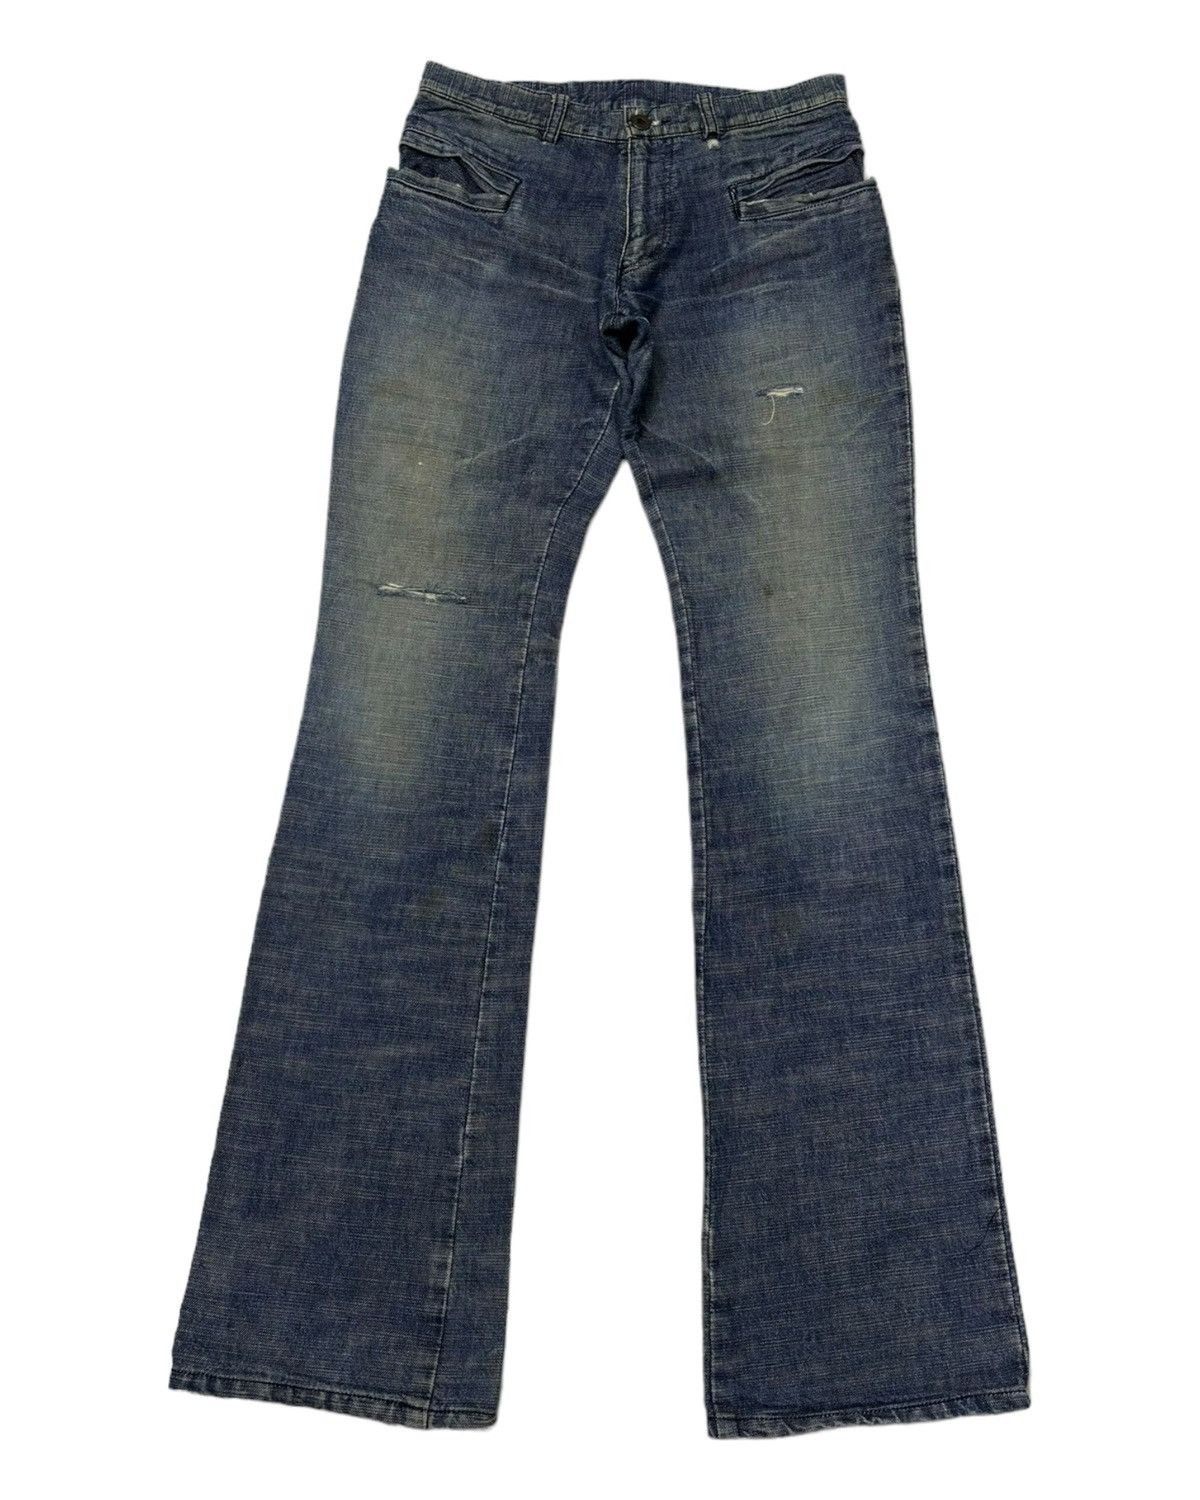 Archival Clothing - 🔥ARCHIVE L7 REAL HIP JAPANESE FLARED DENIM BOOTCUT JEANS - 8